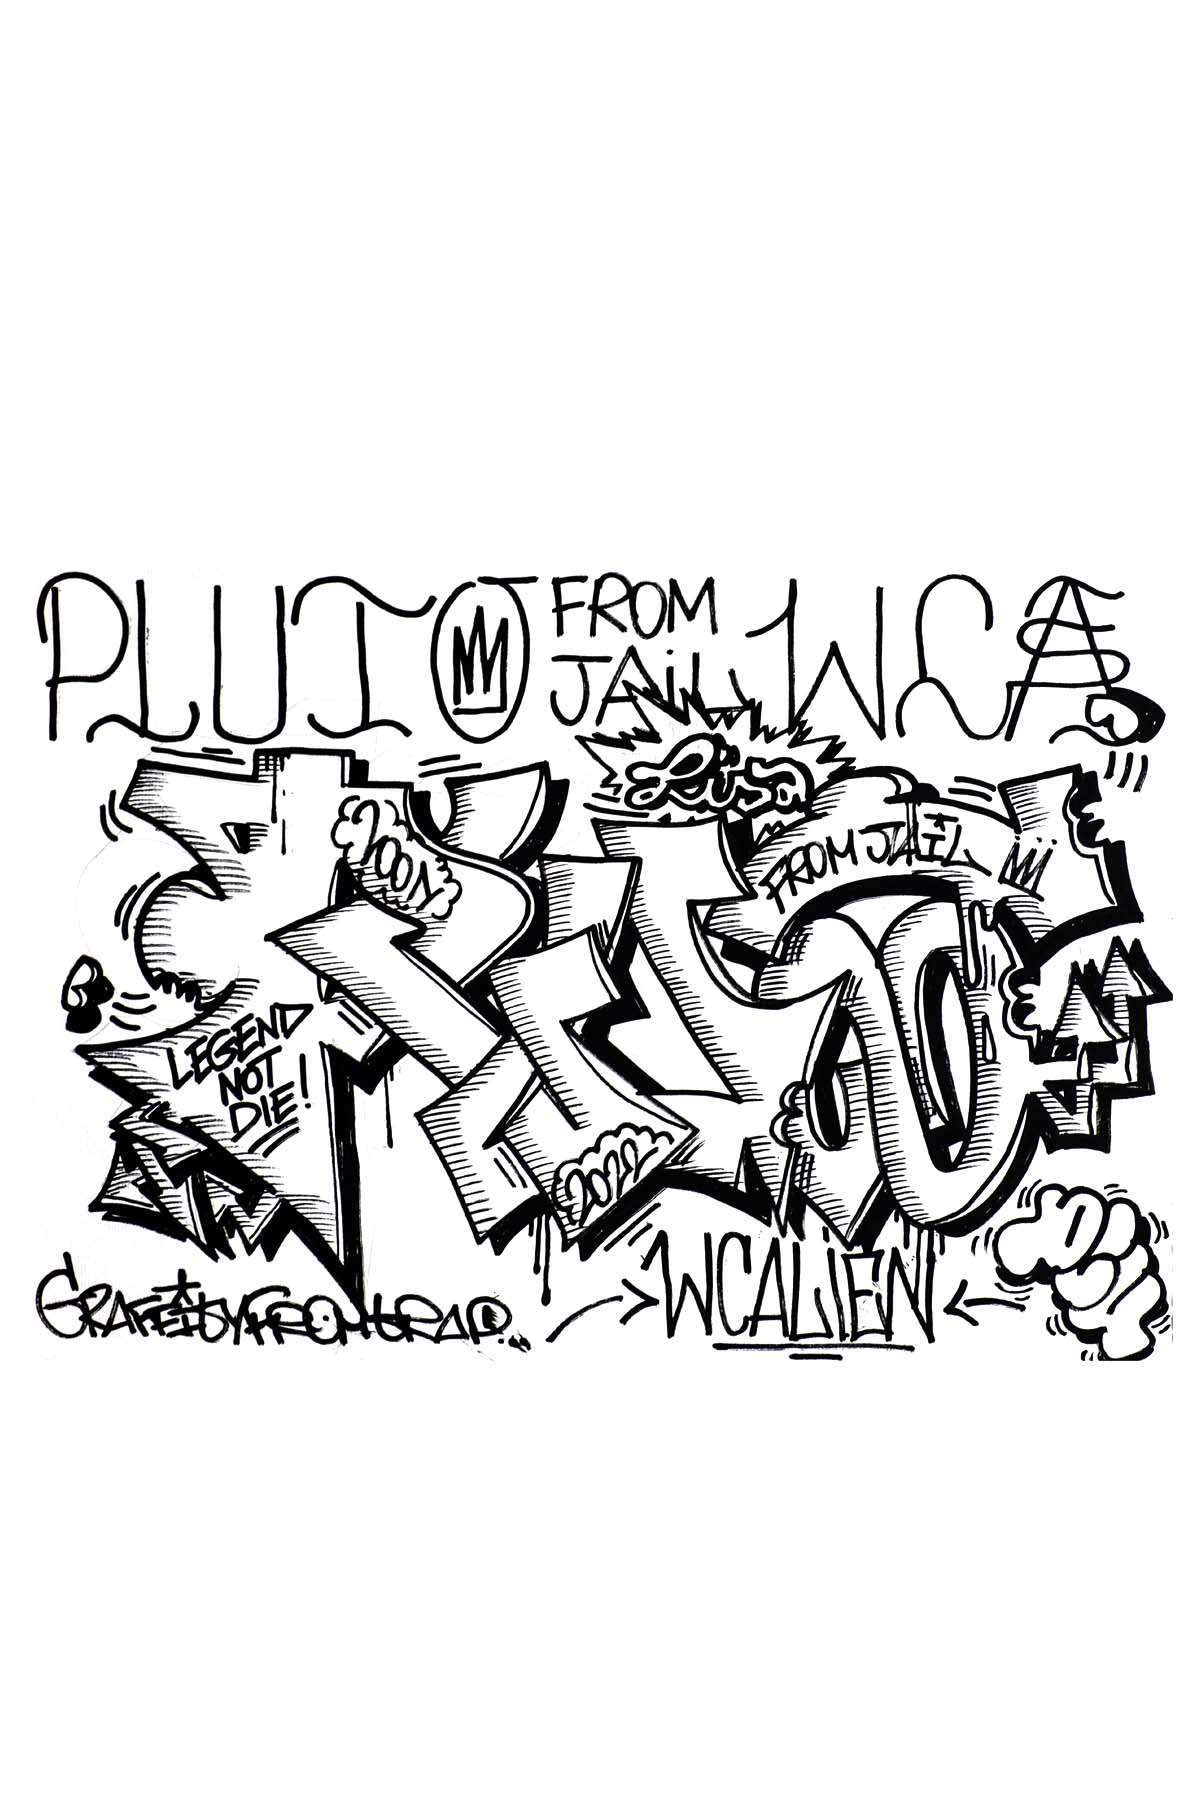 Pluto FROM JAIL 3